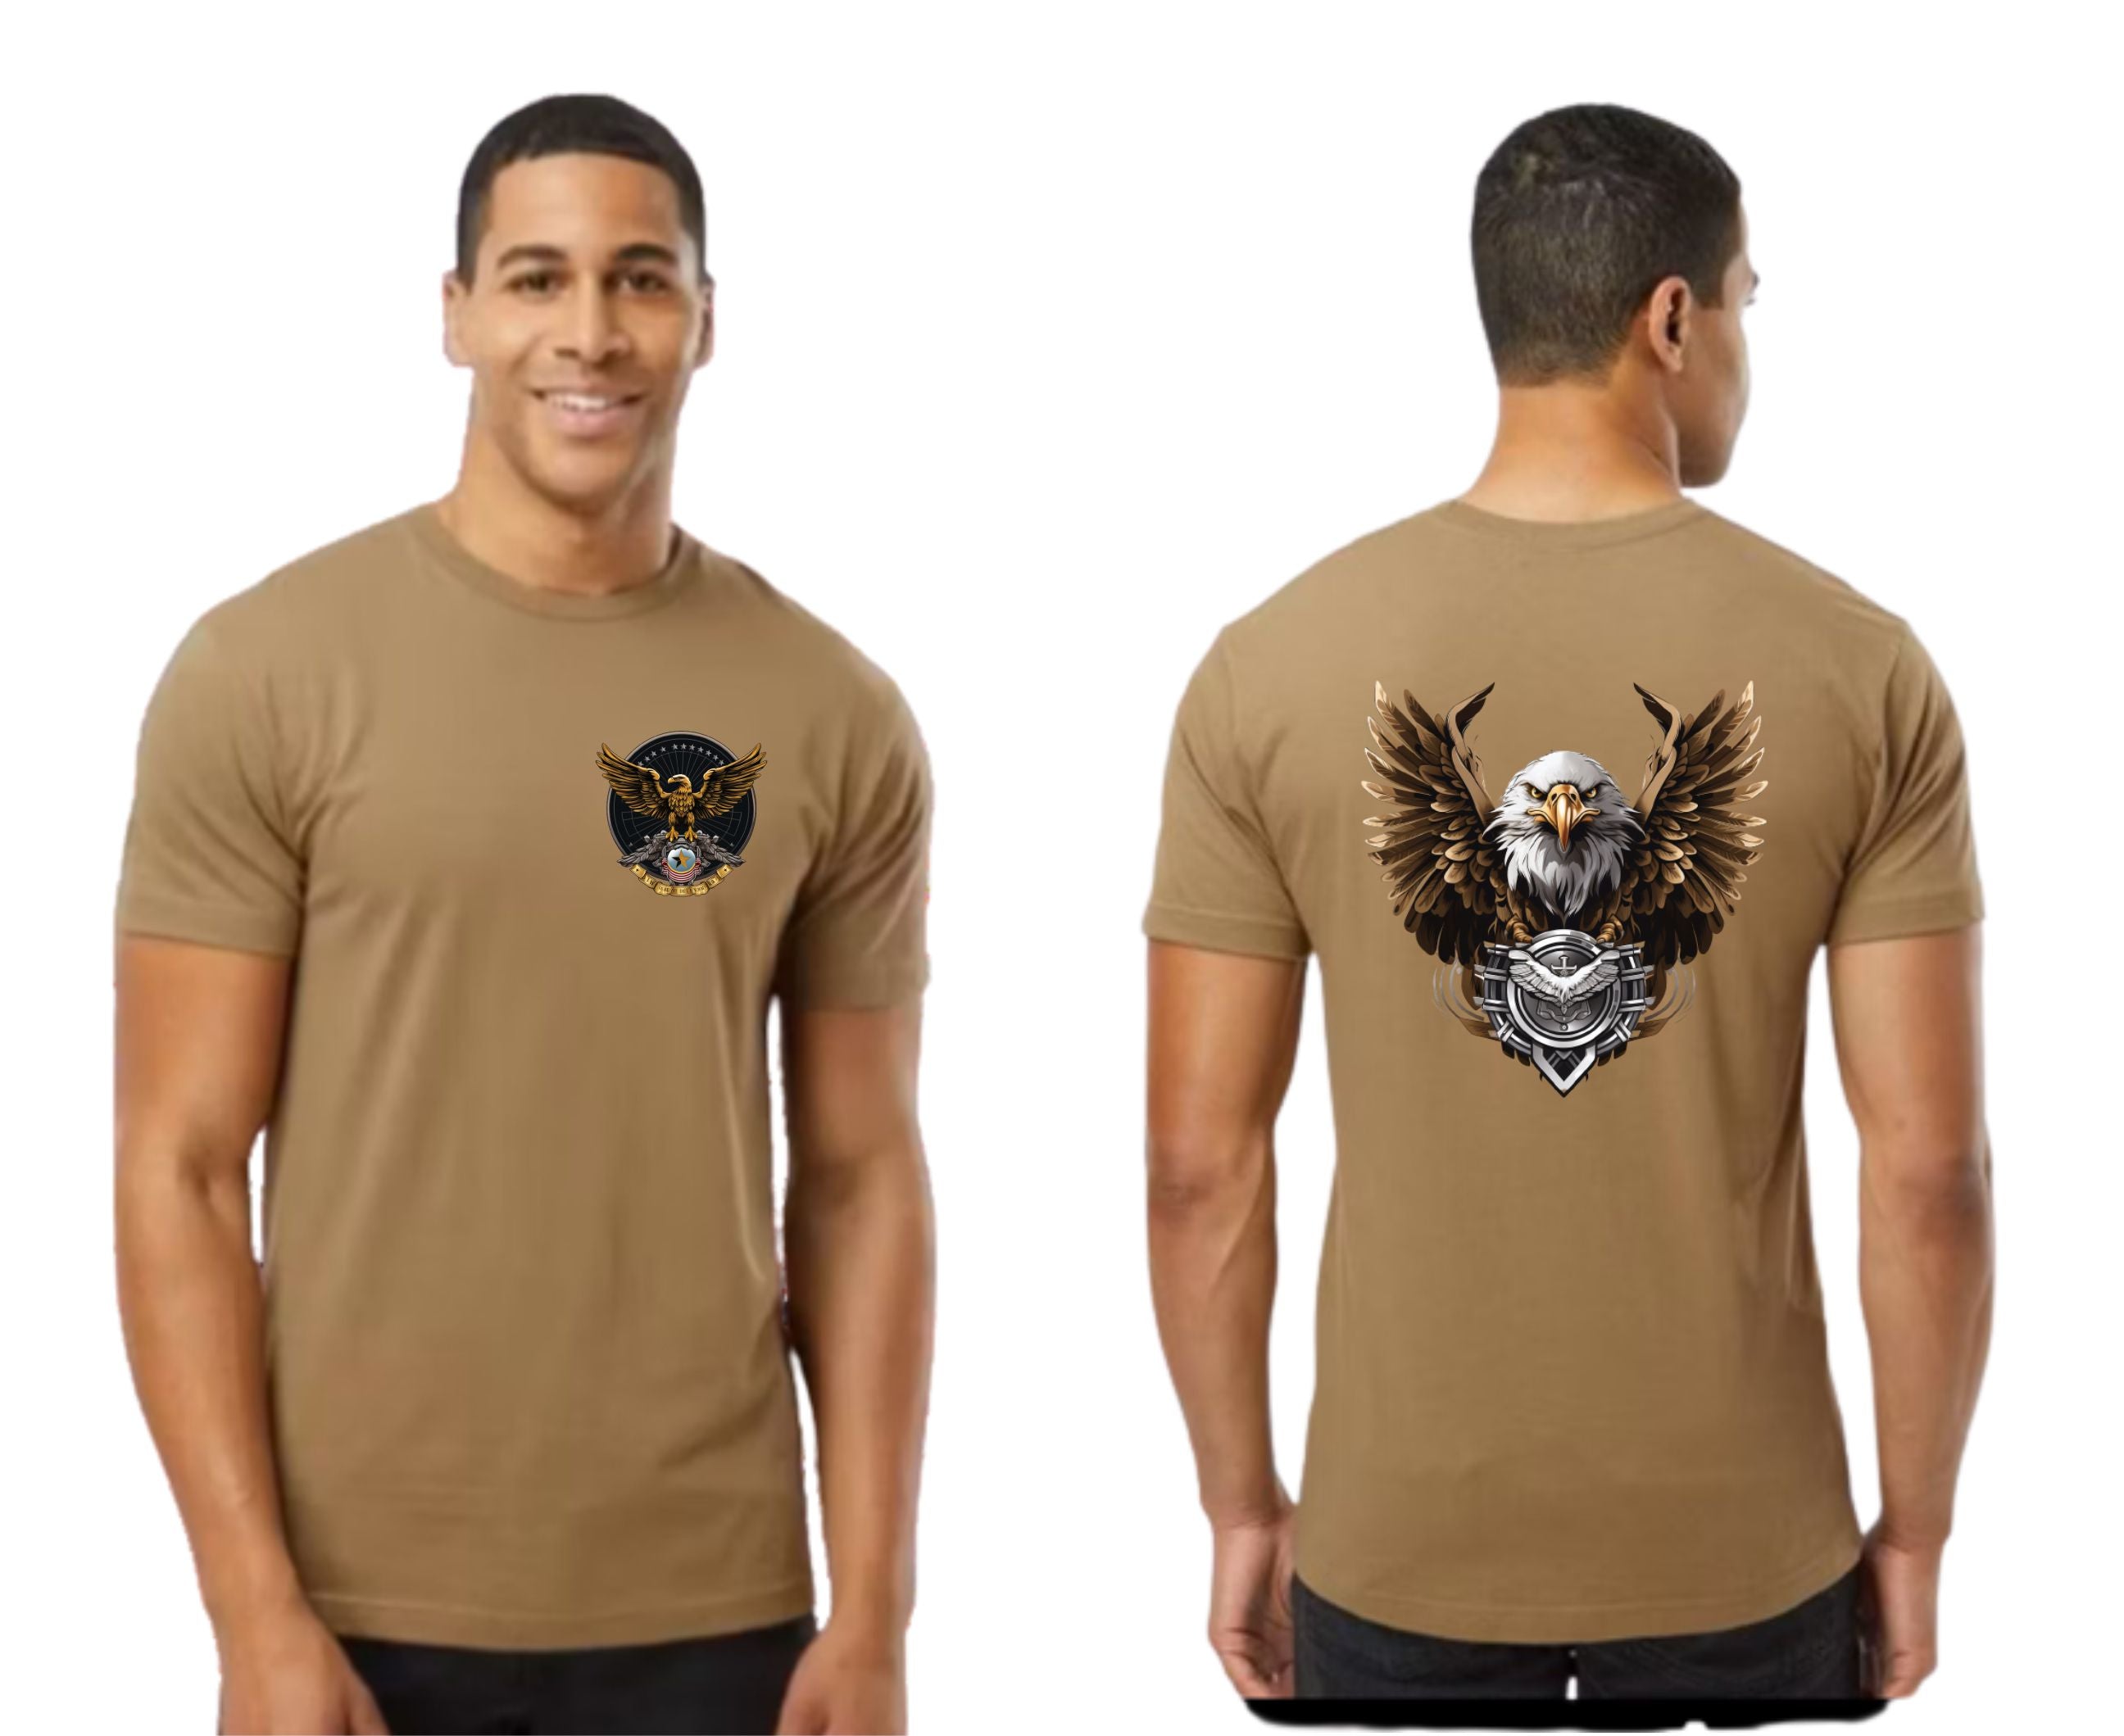 Custom Squadron T-Shirts for Military – Coyote Brown shirts